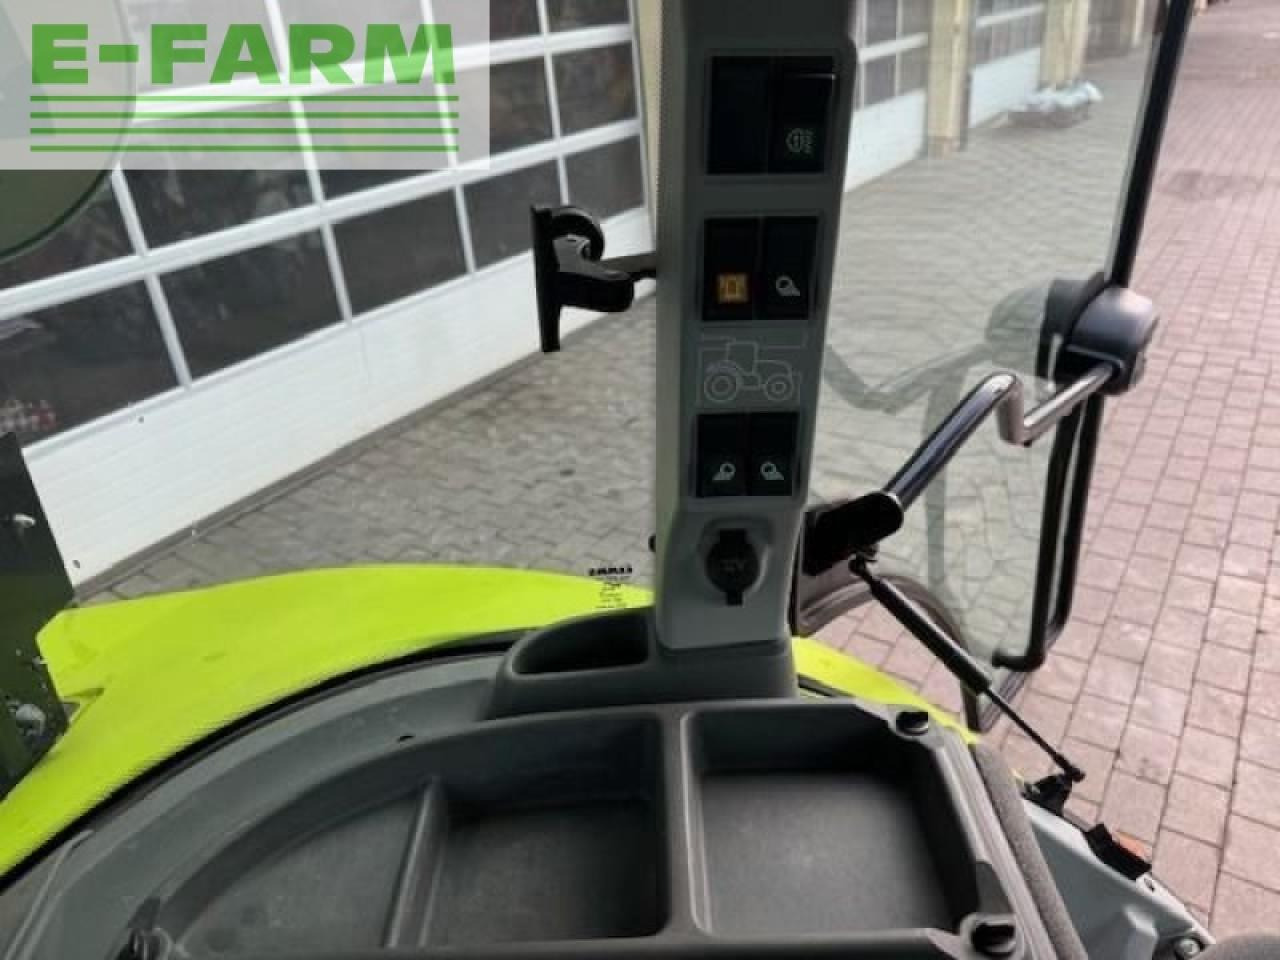 Farm tractor CLAAS arion 410 panoramic